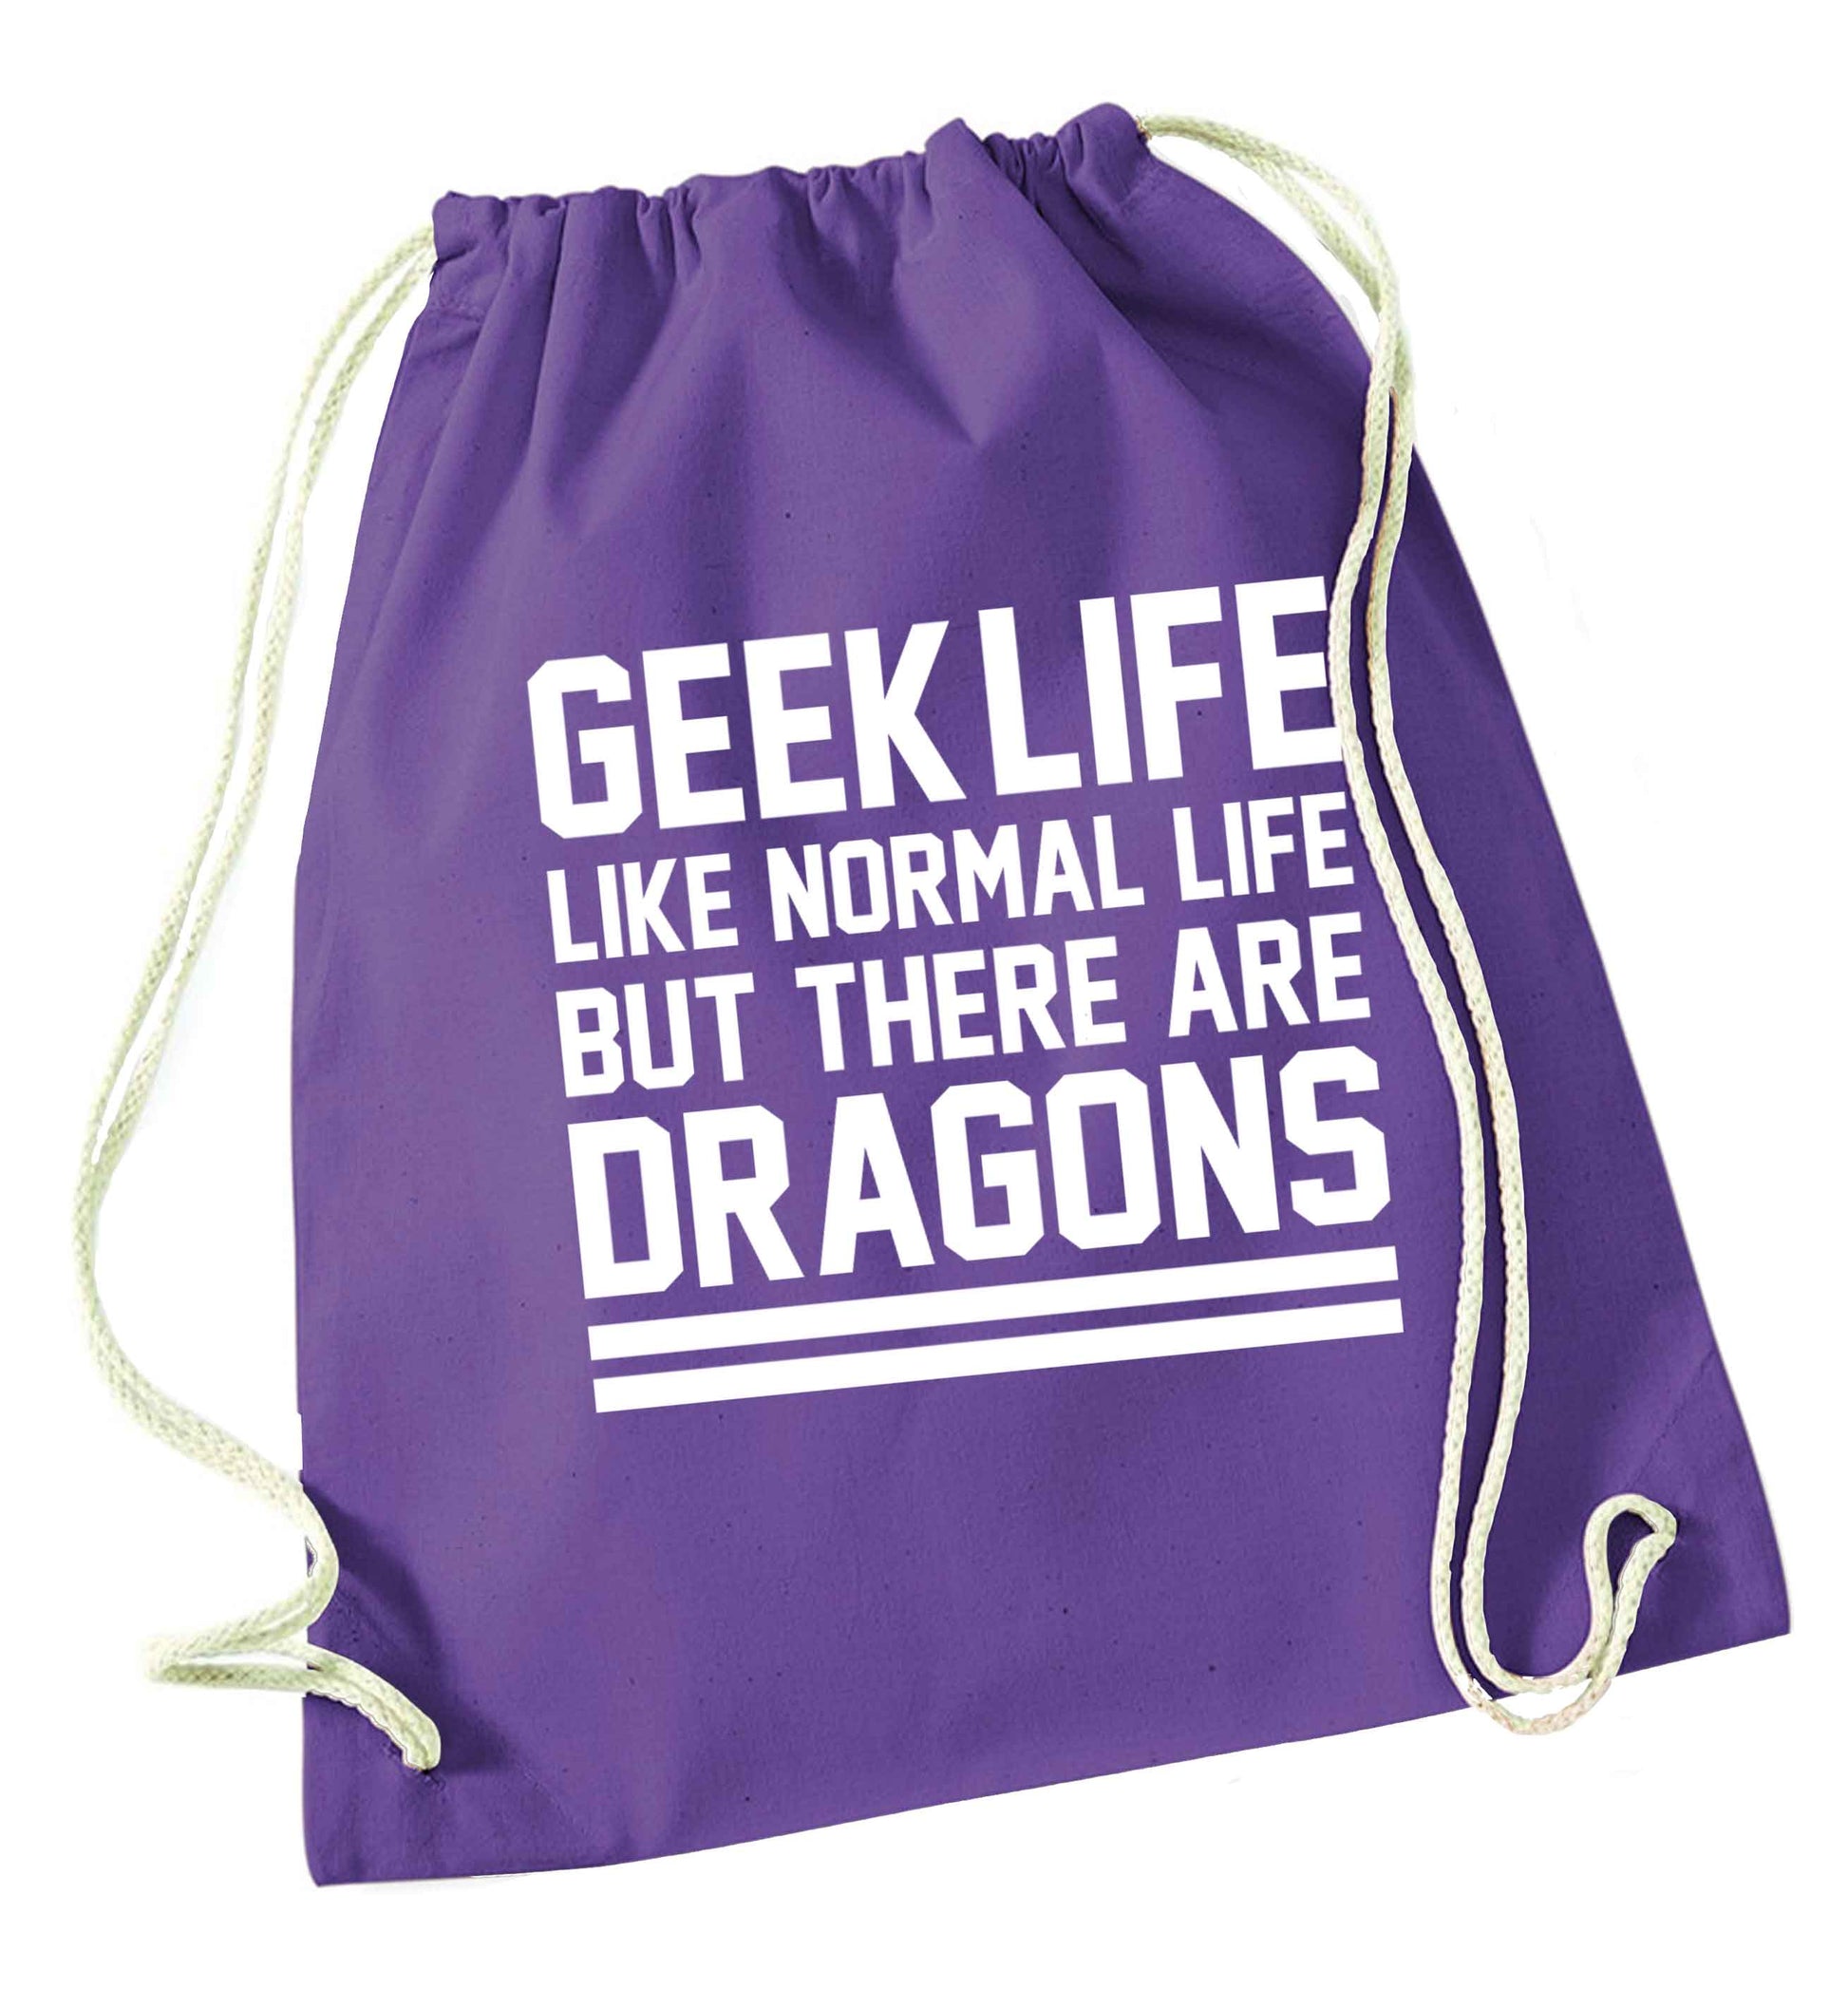 Geek life like normal life but there are dragons purple drawstring bag